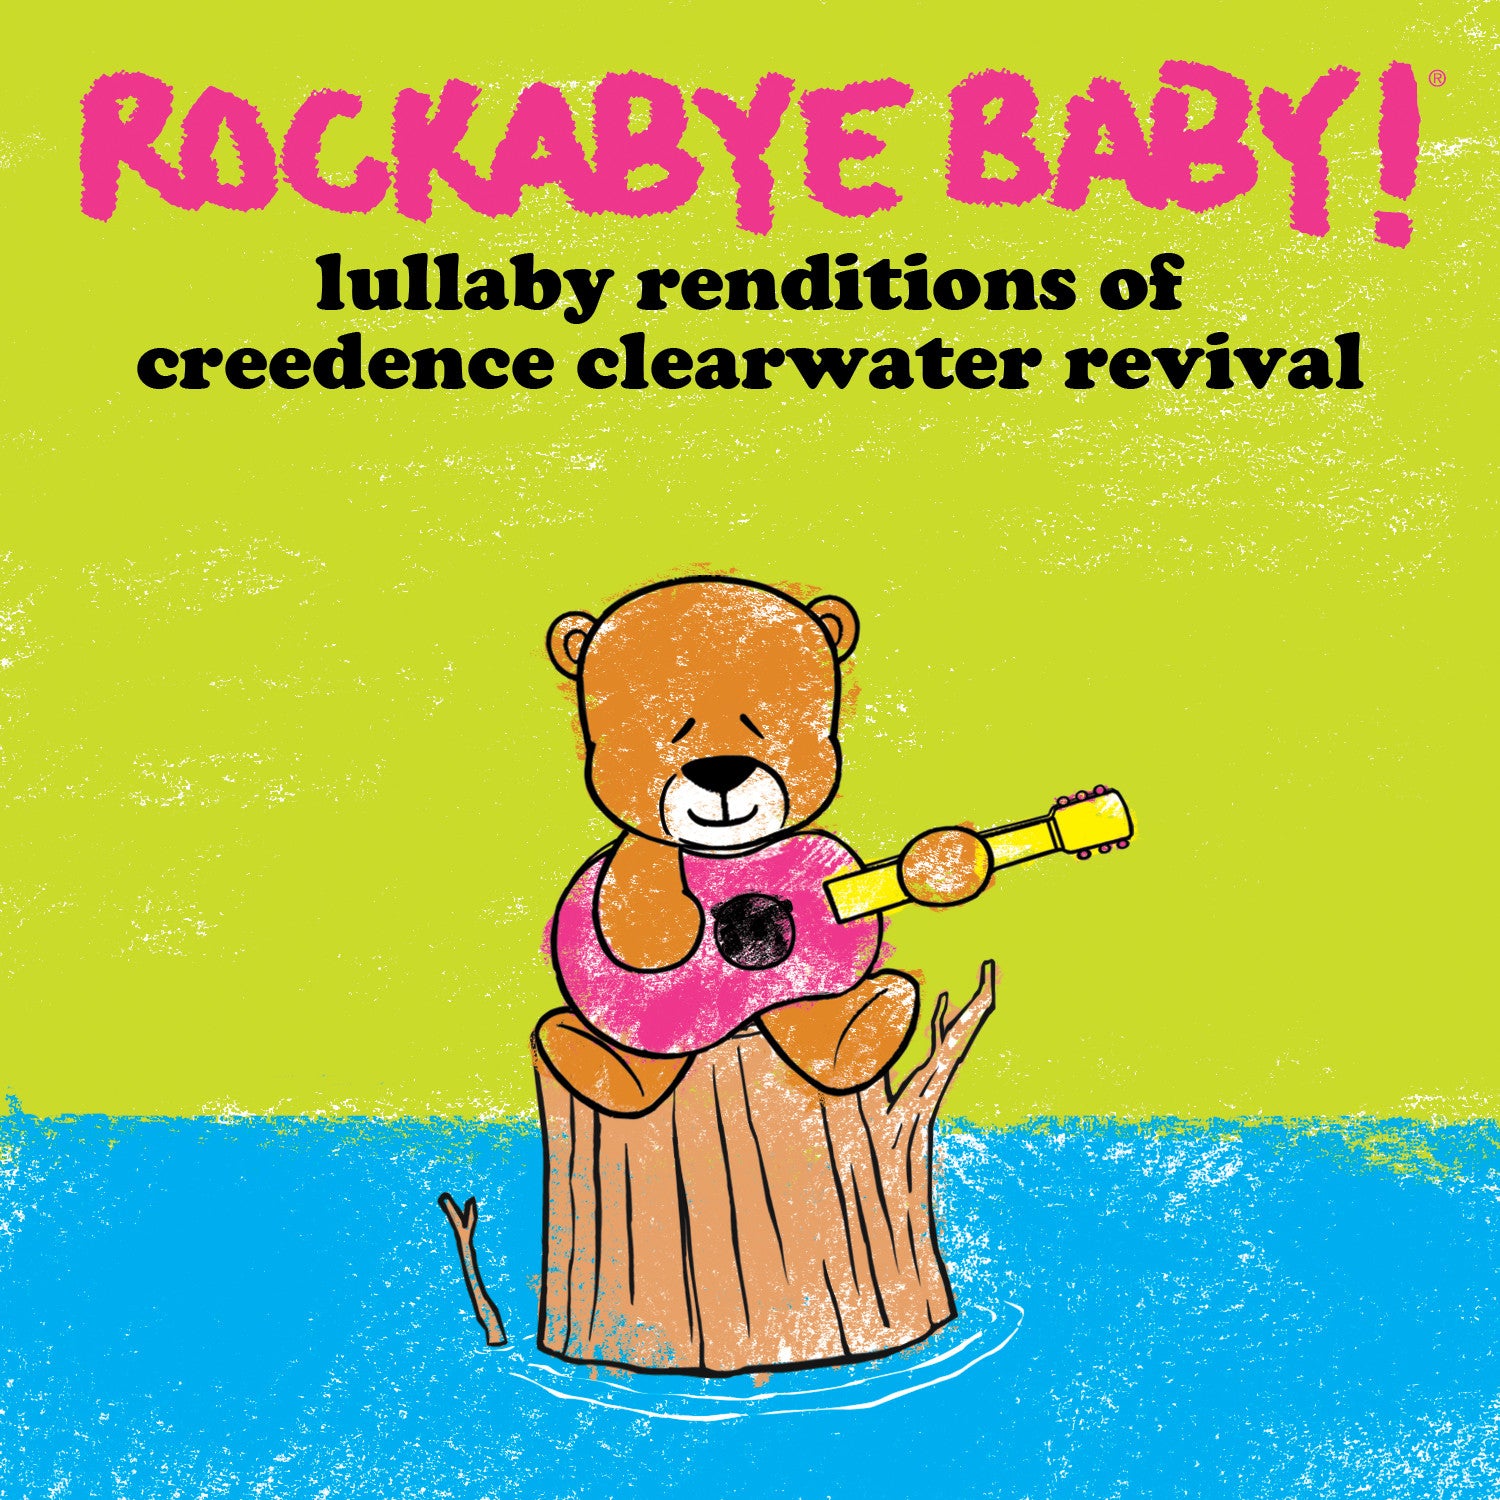 rockabye baby lullaby renditions creedence clearwater revivial ccr